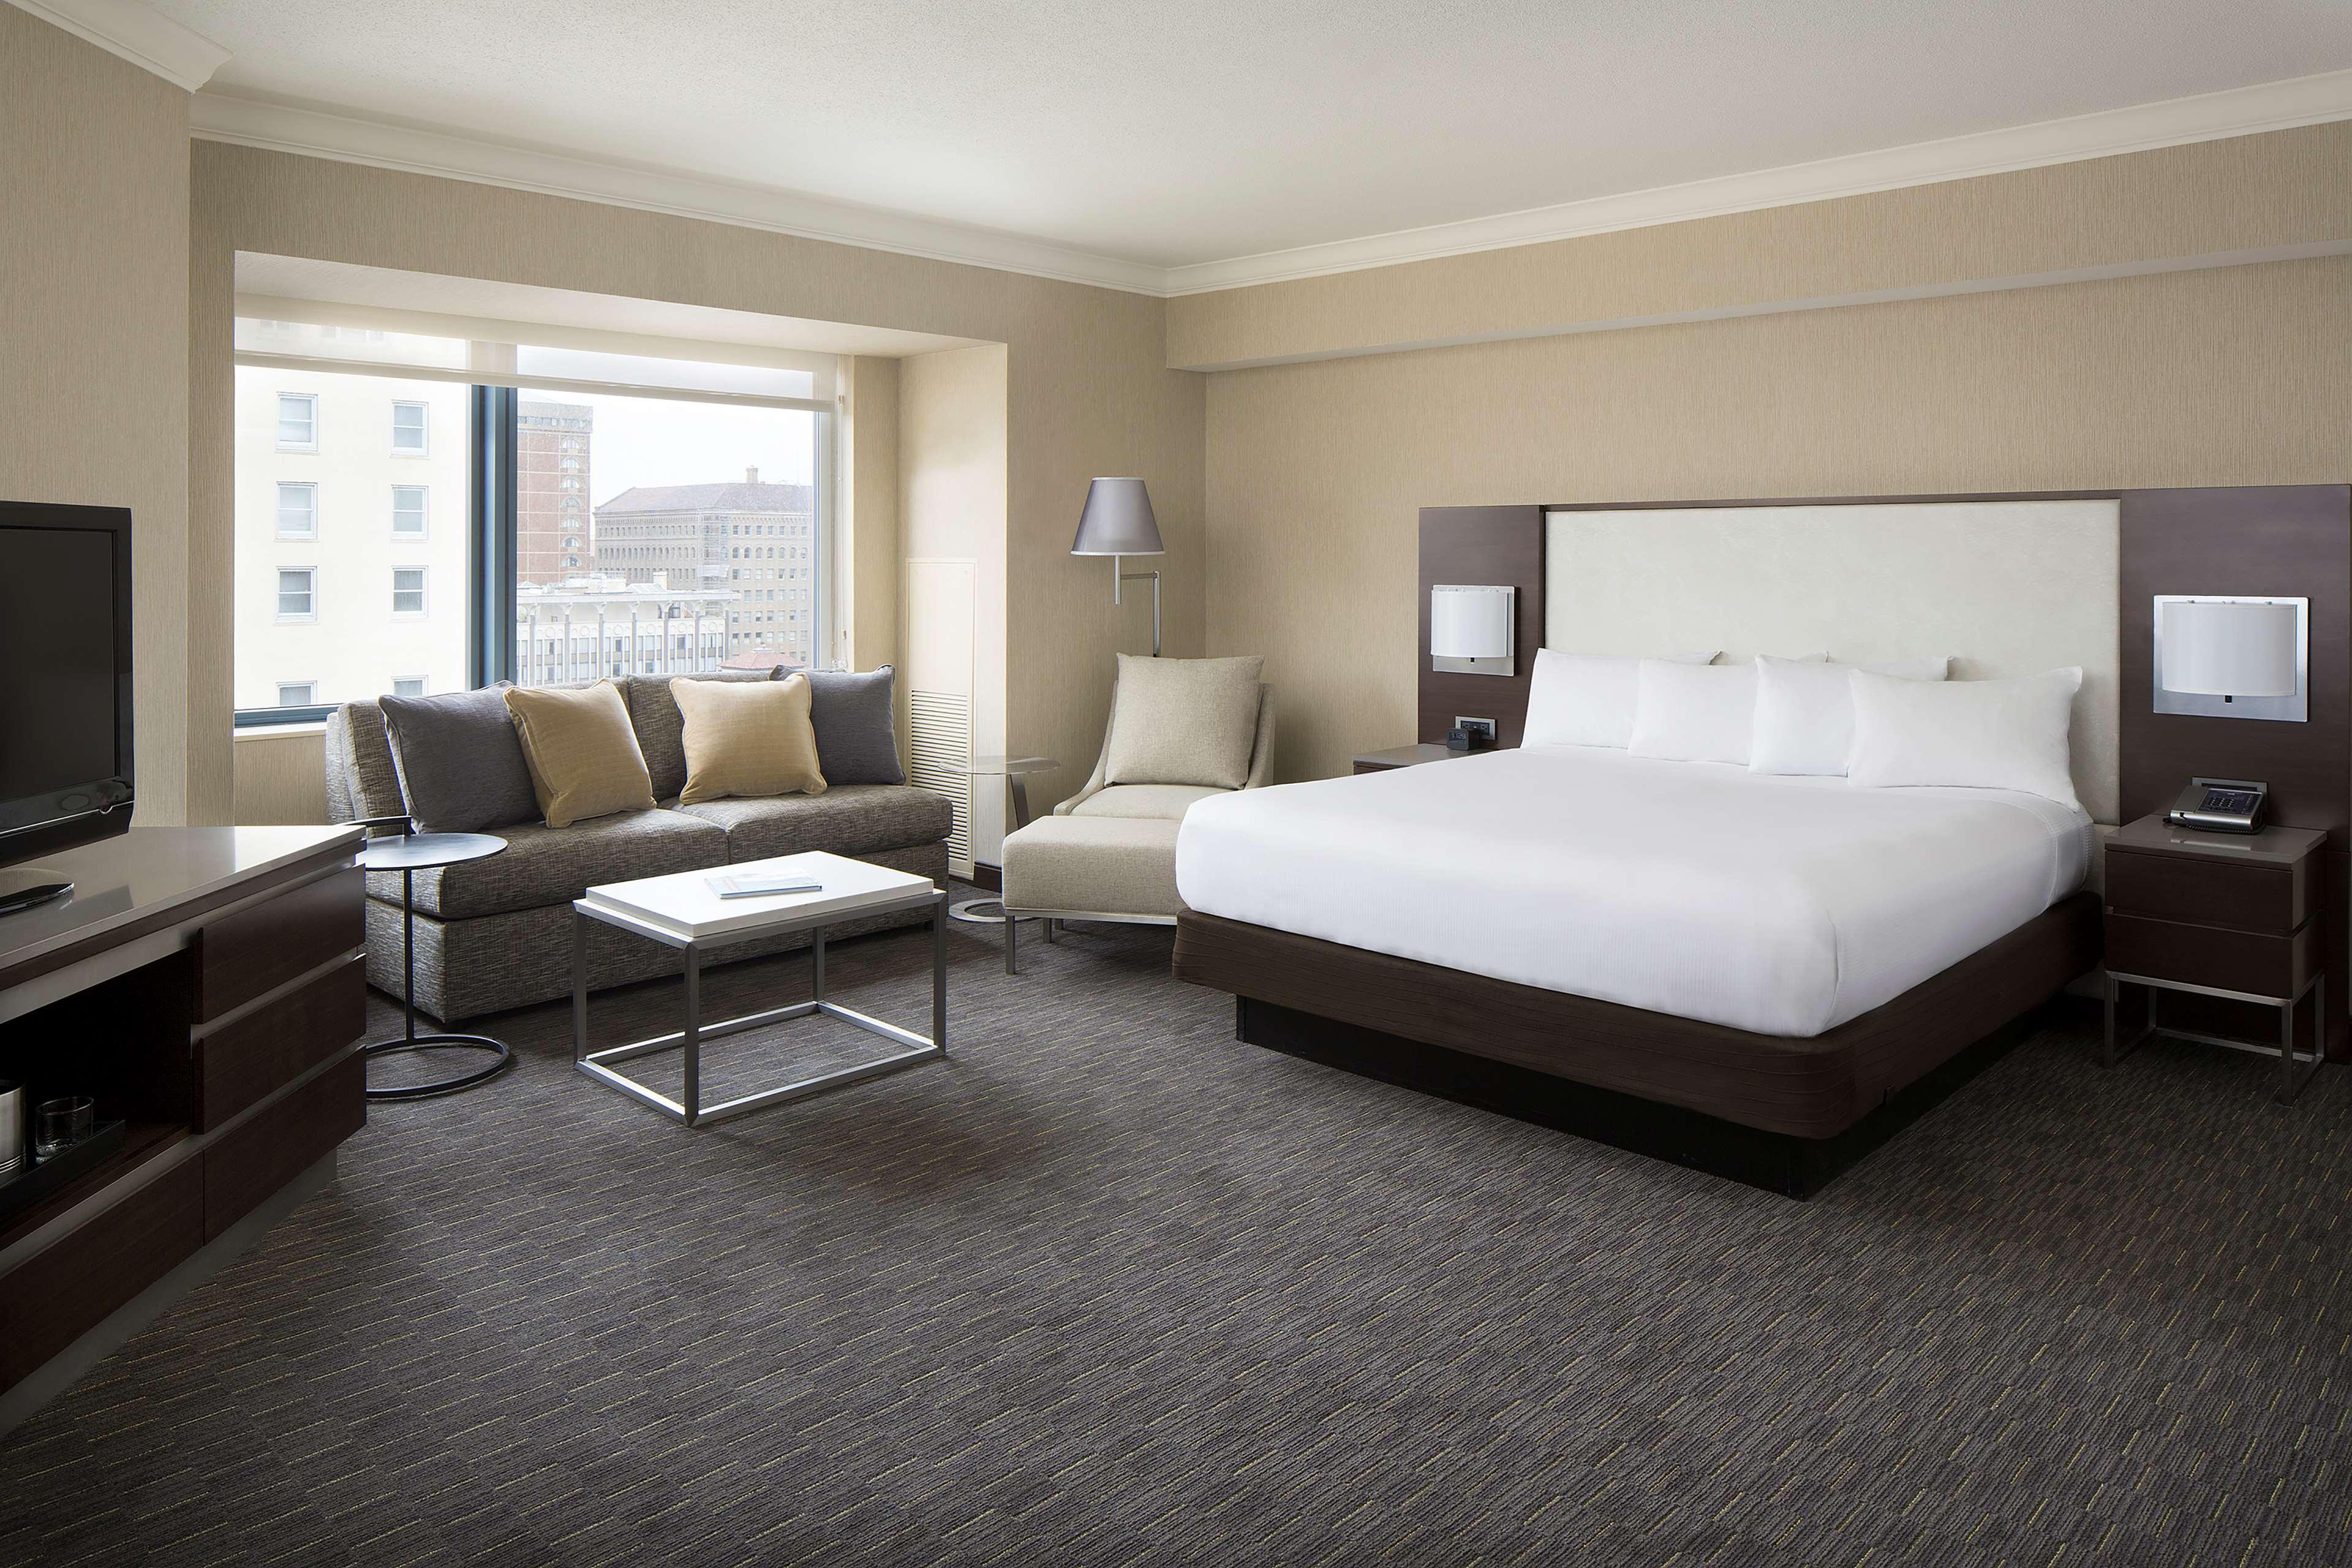 Hilton San Francisco Union Square in San Francisco: Find Hotel Reviews,  Rooms, and Prices on